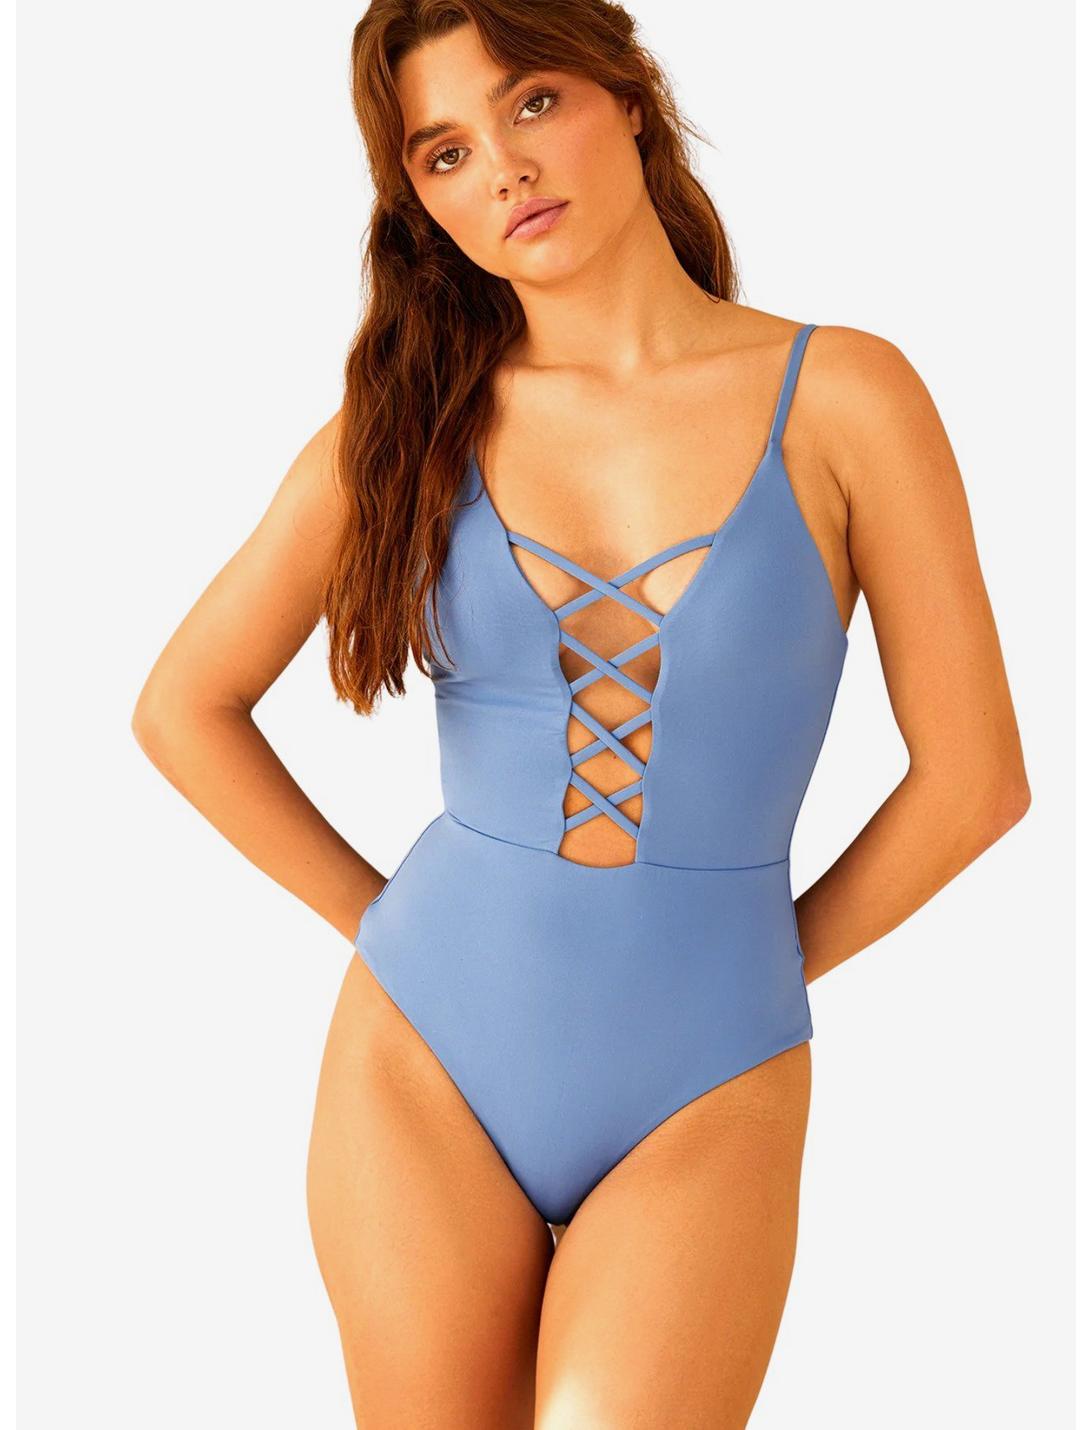 Dippin' Daisy's Bliss Swim One Piece South Pacific Blue, POWDER BLUE, hi-res